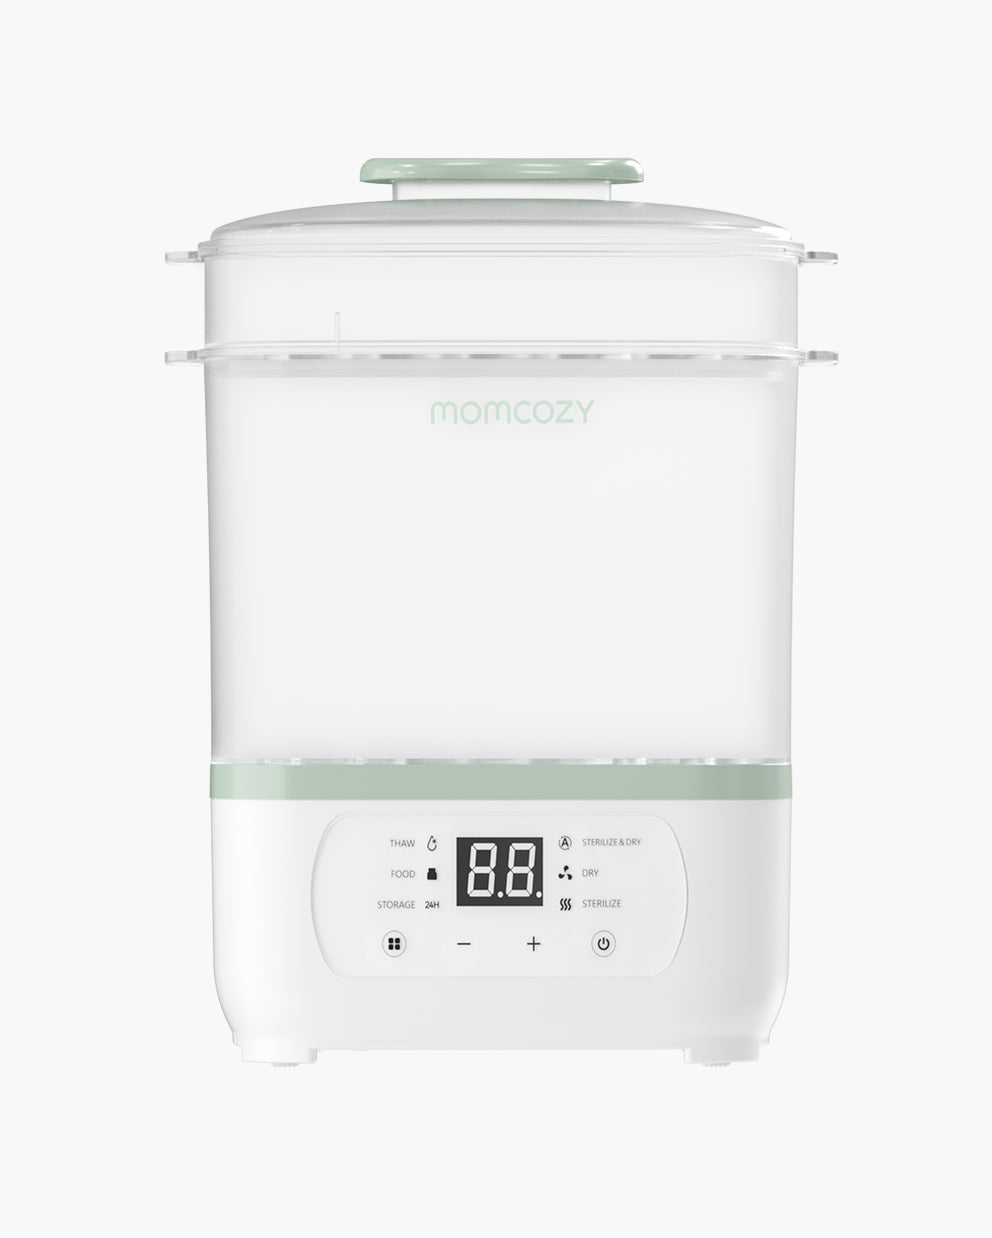 Tommee Tippee Electric Steam Sterilizer - Parents' Favorite